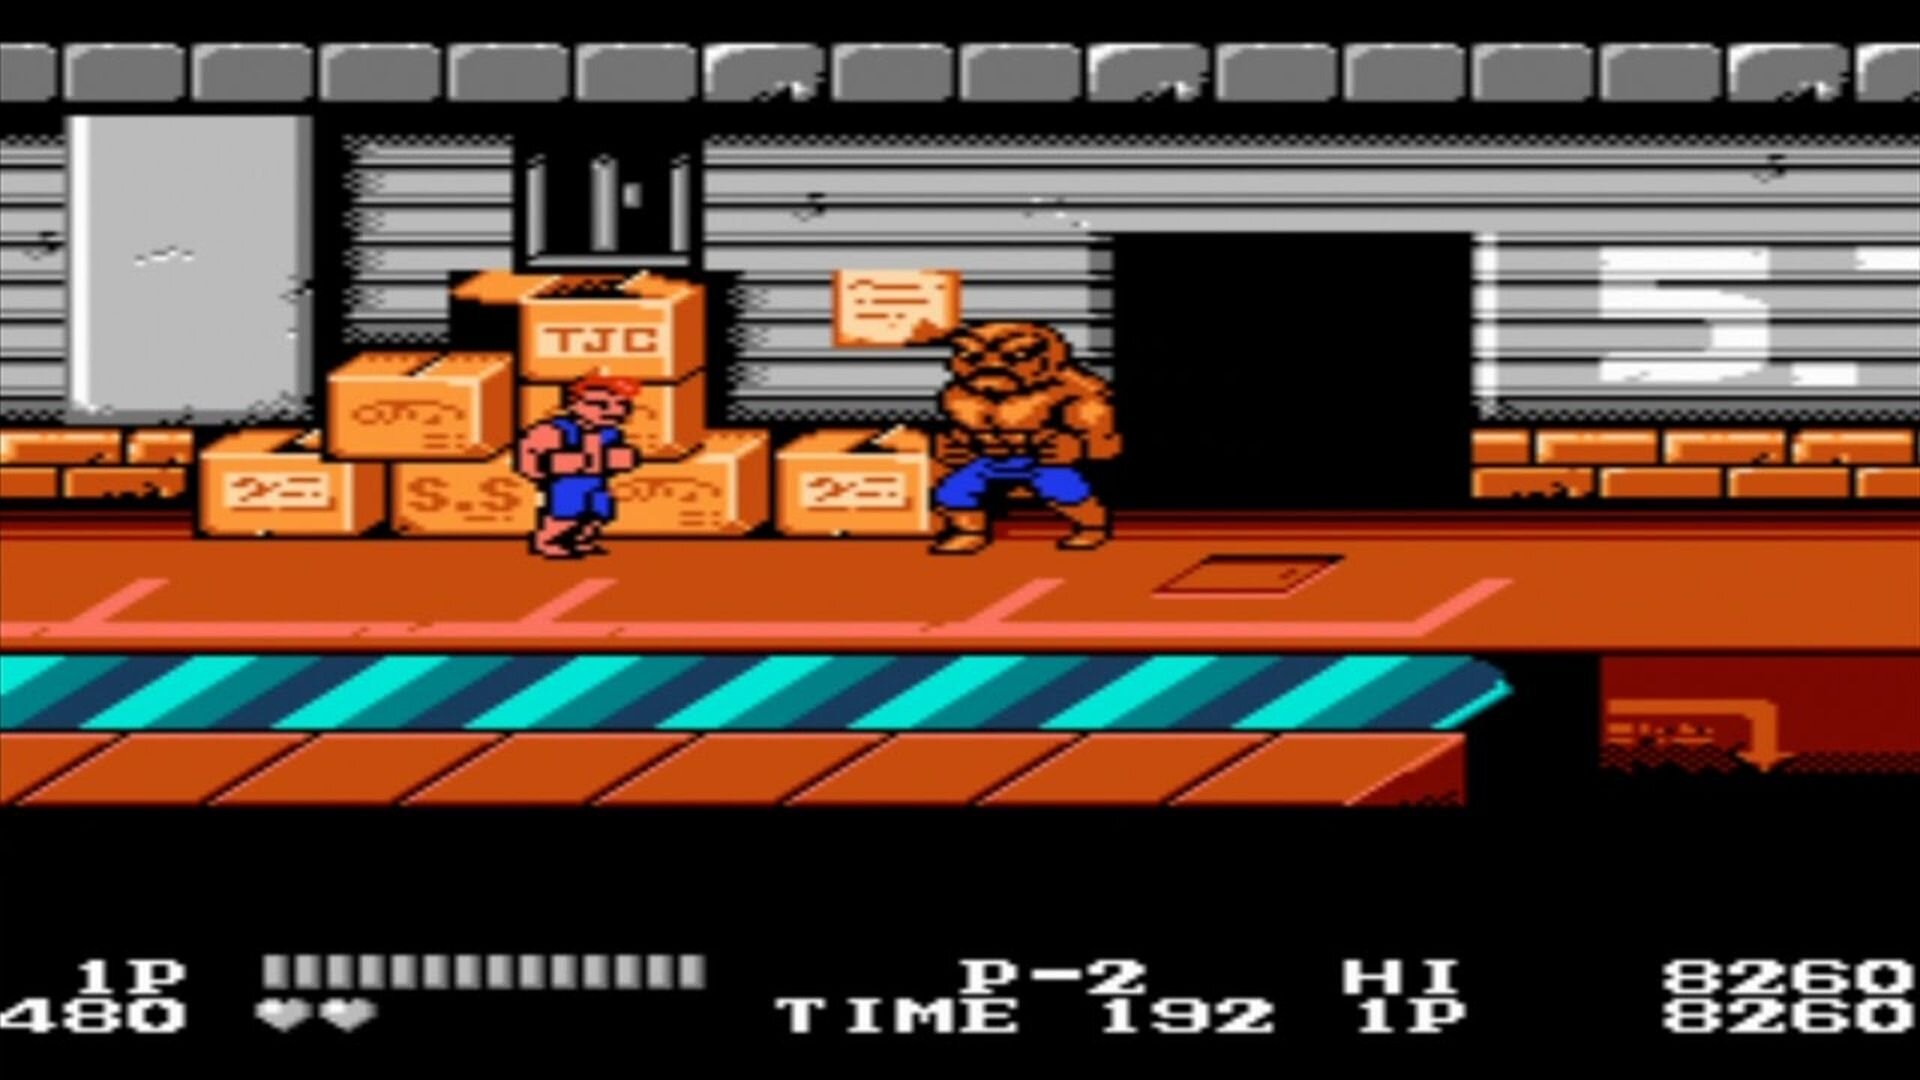 Double Dragon & Kunio-kun Collection Likely Coming West